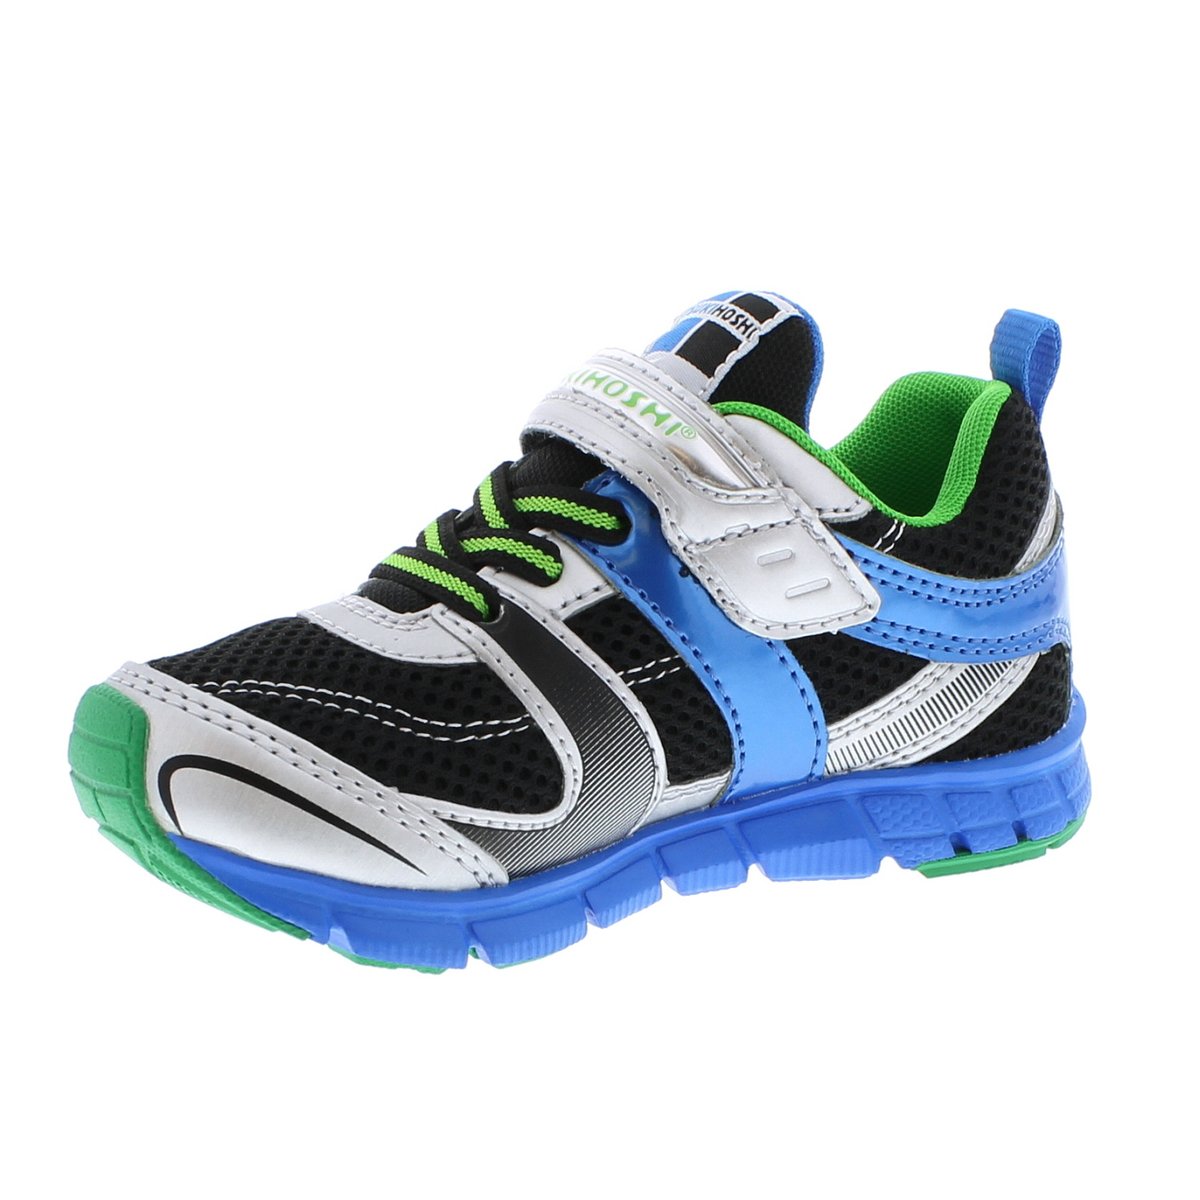 Child Tsukihoshi Velocity Sneaker in Silver/Black from the front view